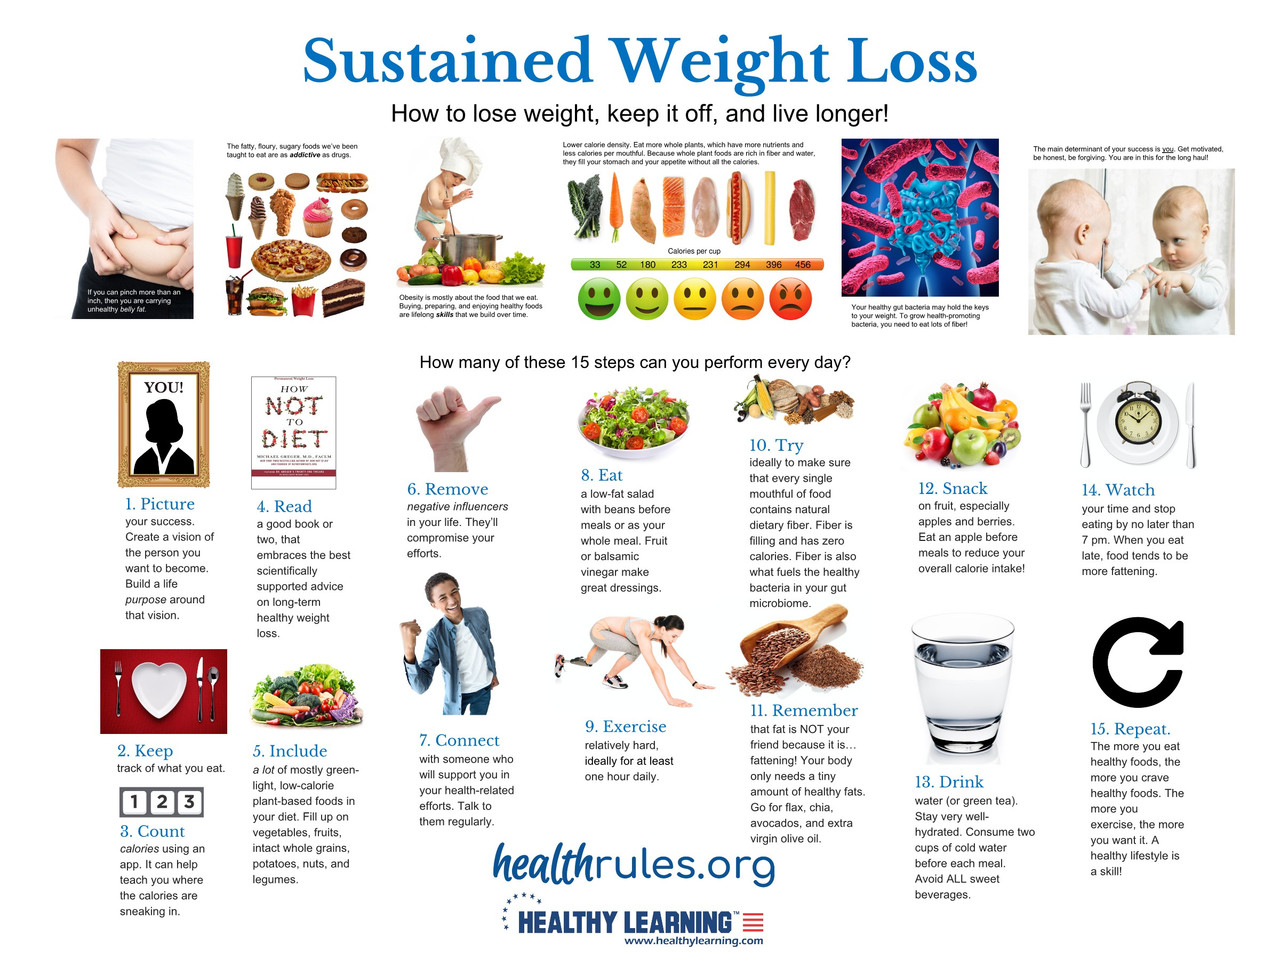 Sustained weight loss